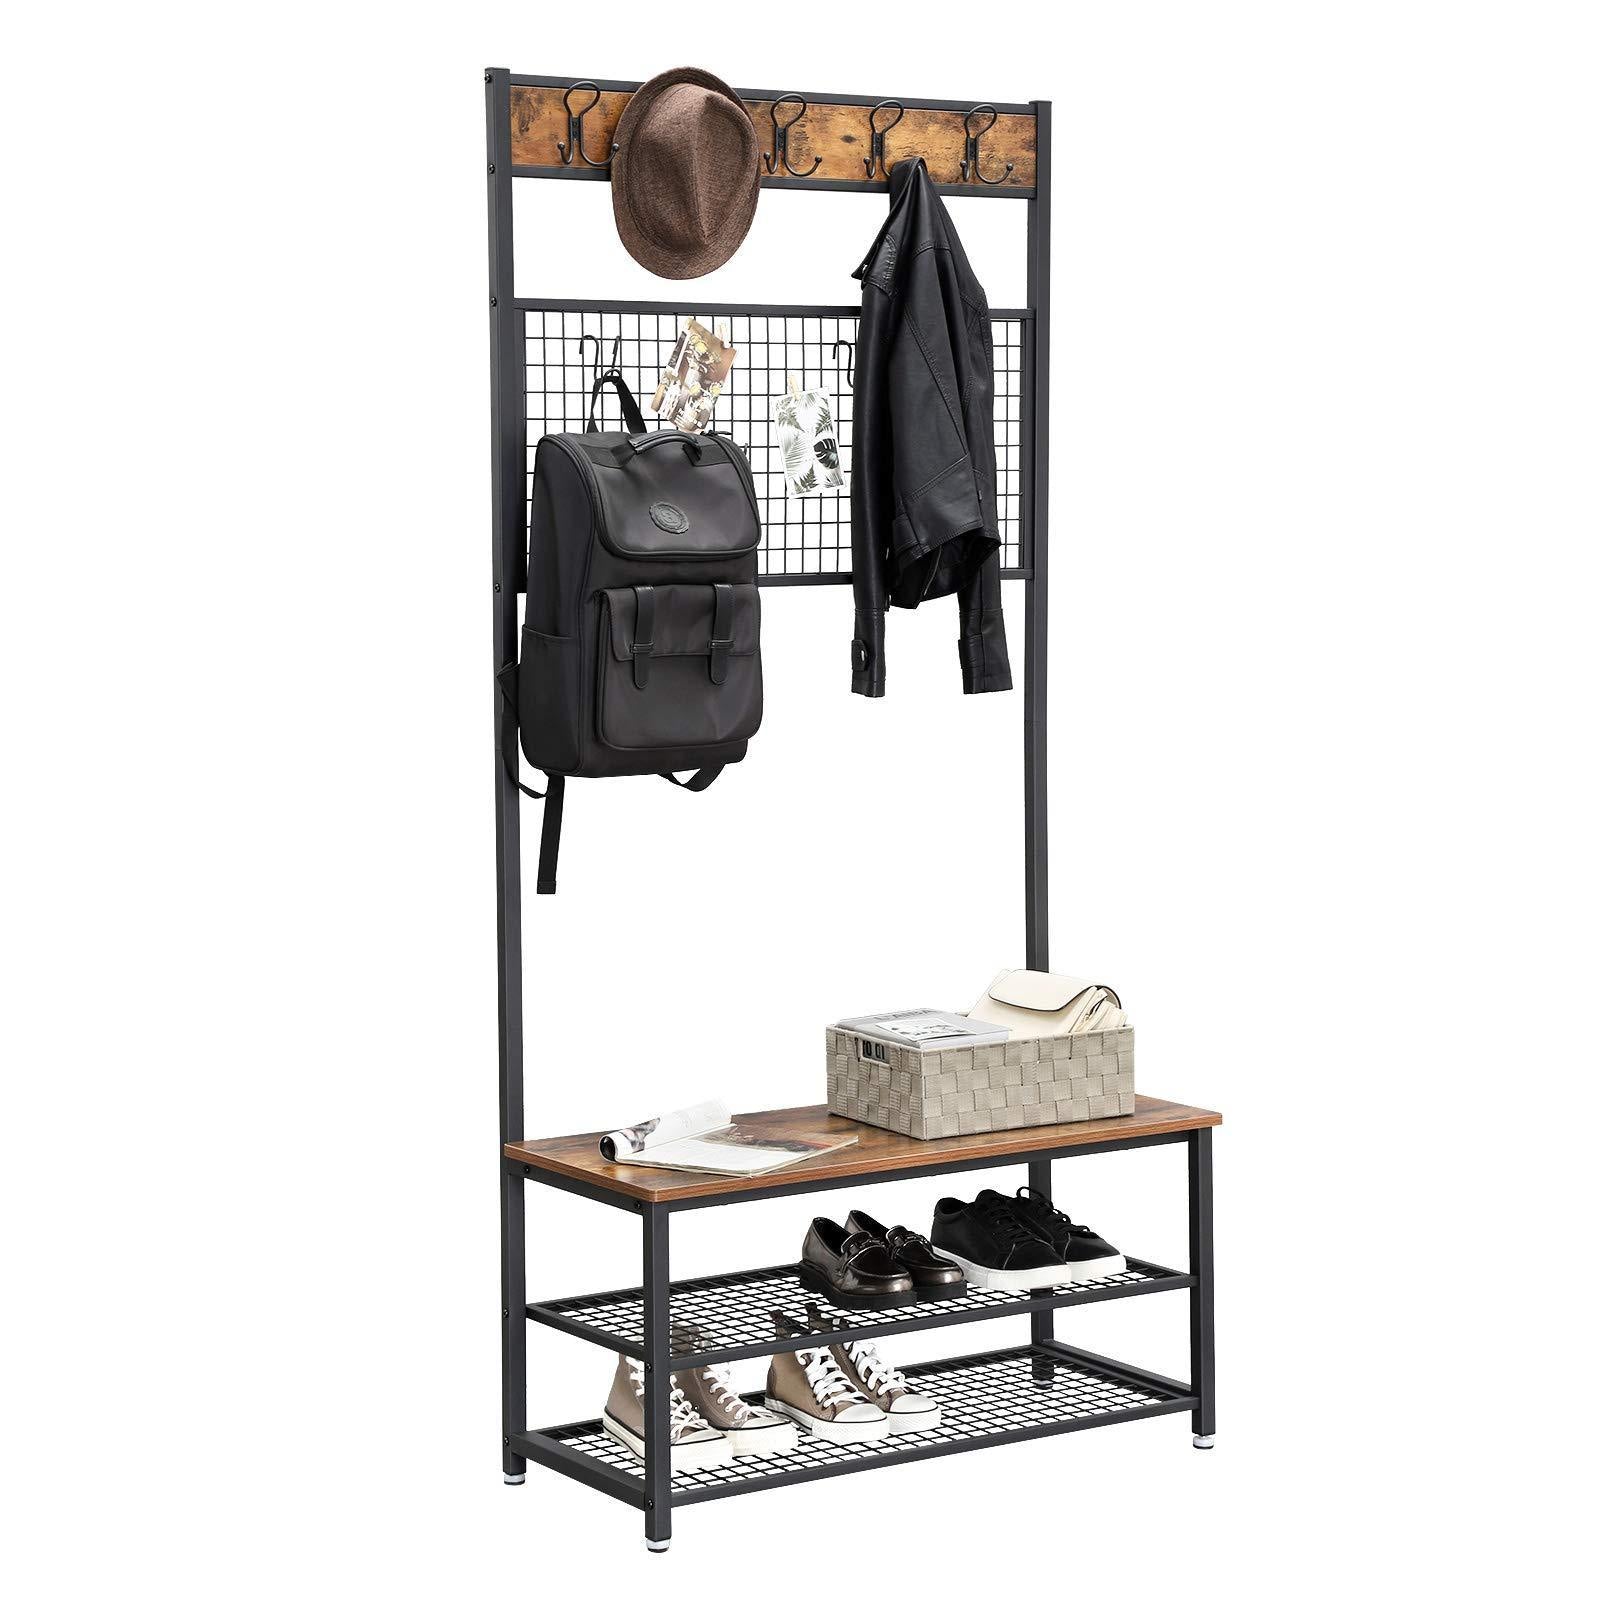 Save vasagle industrial coat stand shoe rack bench with grid memo board 9 hooks and storage shelves hall tree with stable metal frame rustic brown uhsr46bx